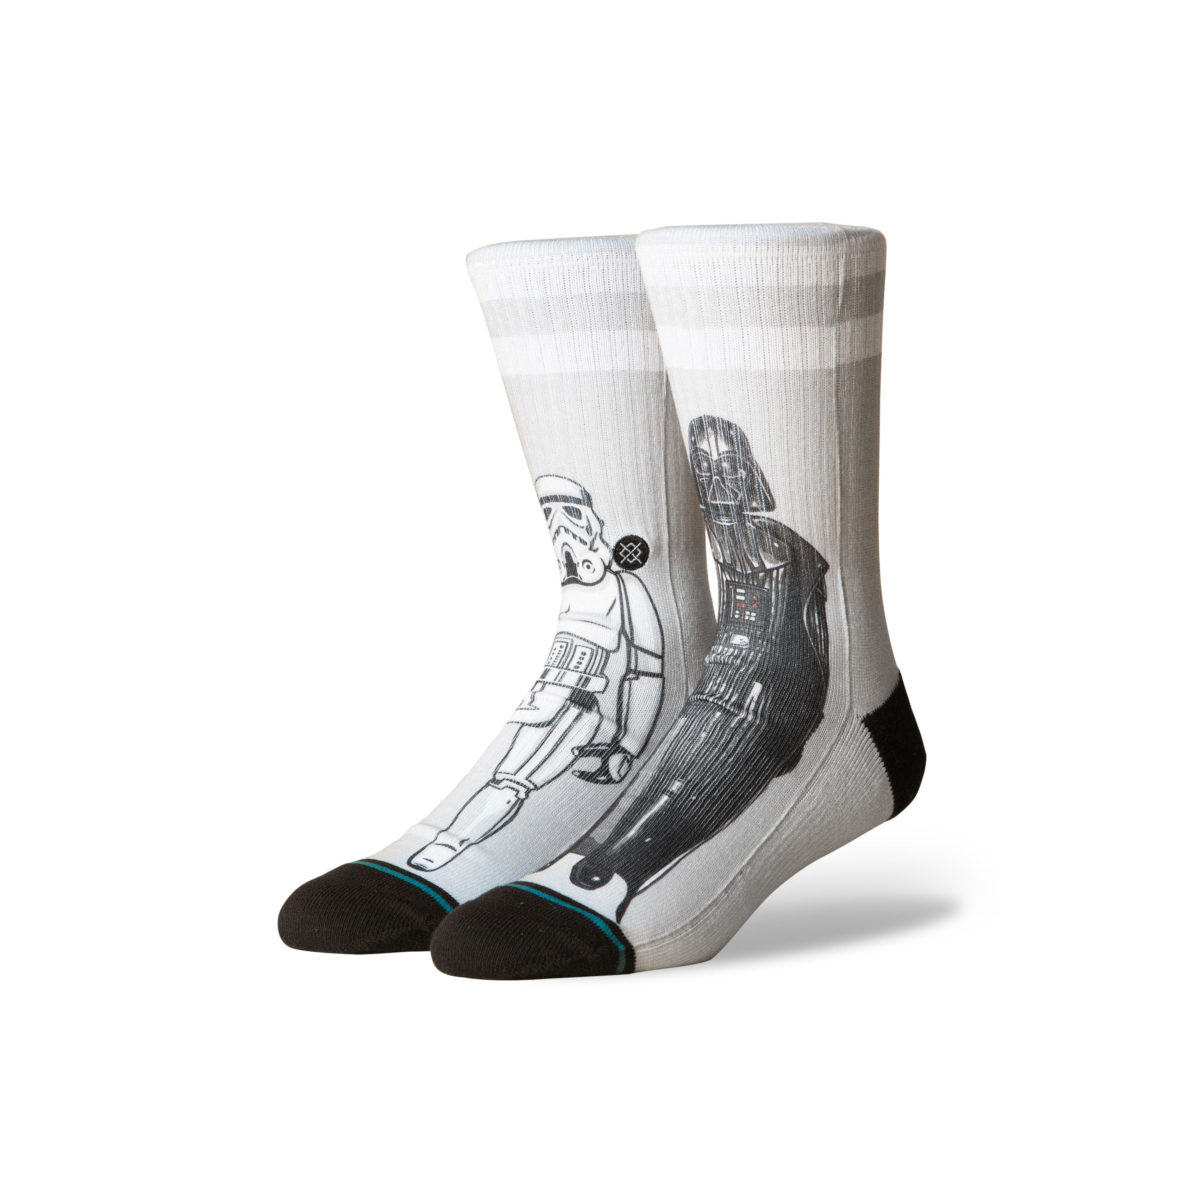 Stance Has Released Star Wars Action Figure-Inspired Socks